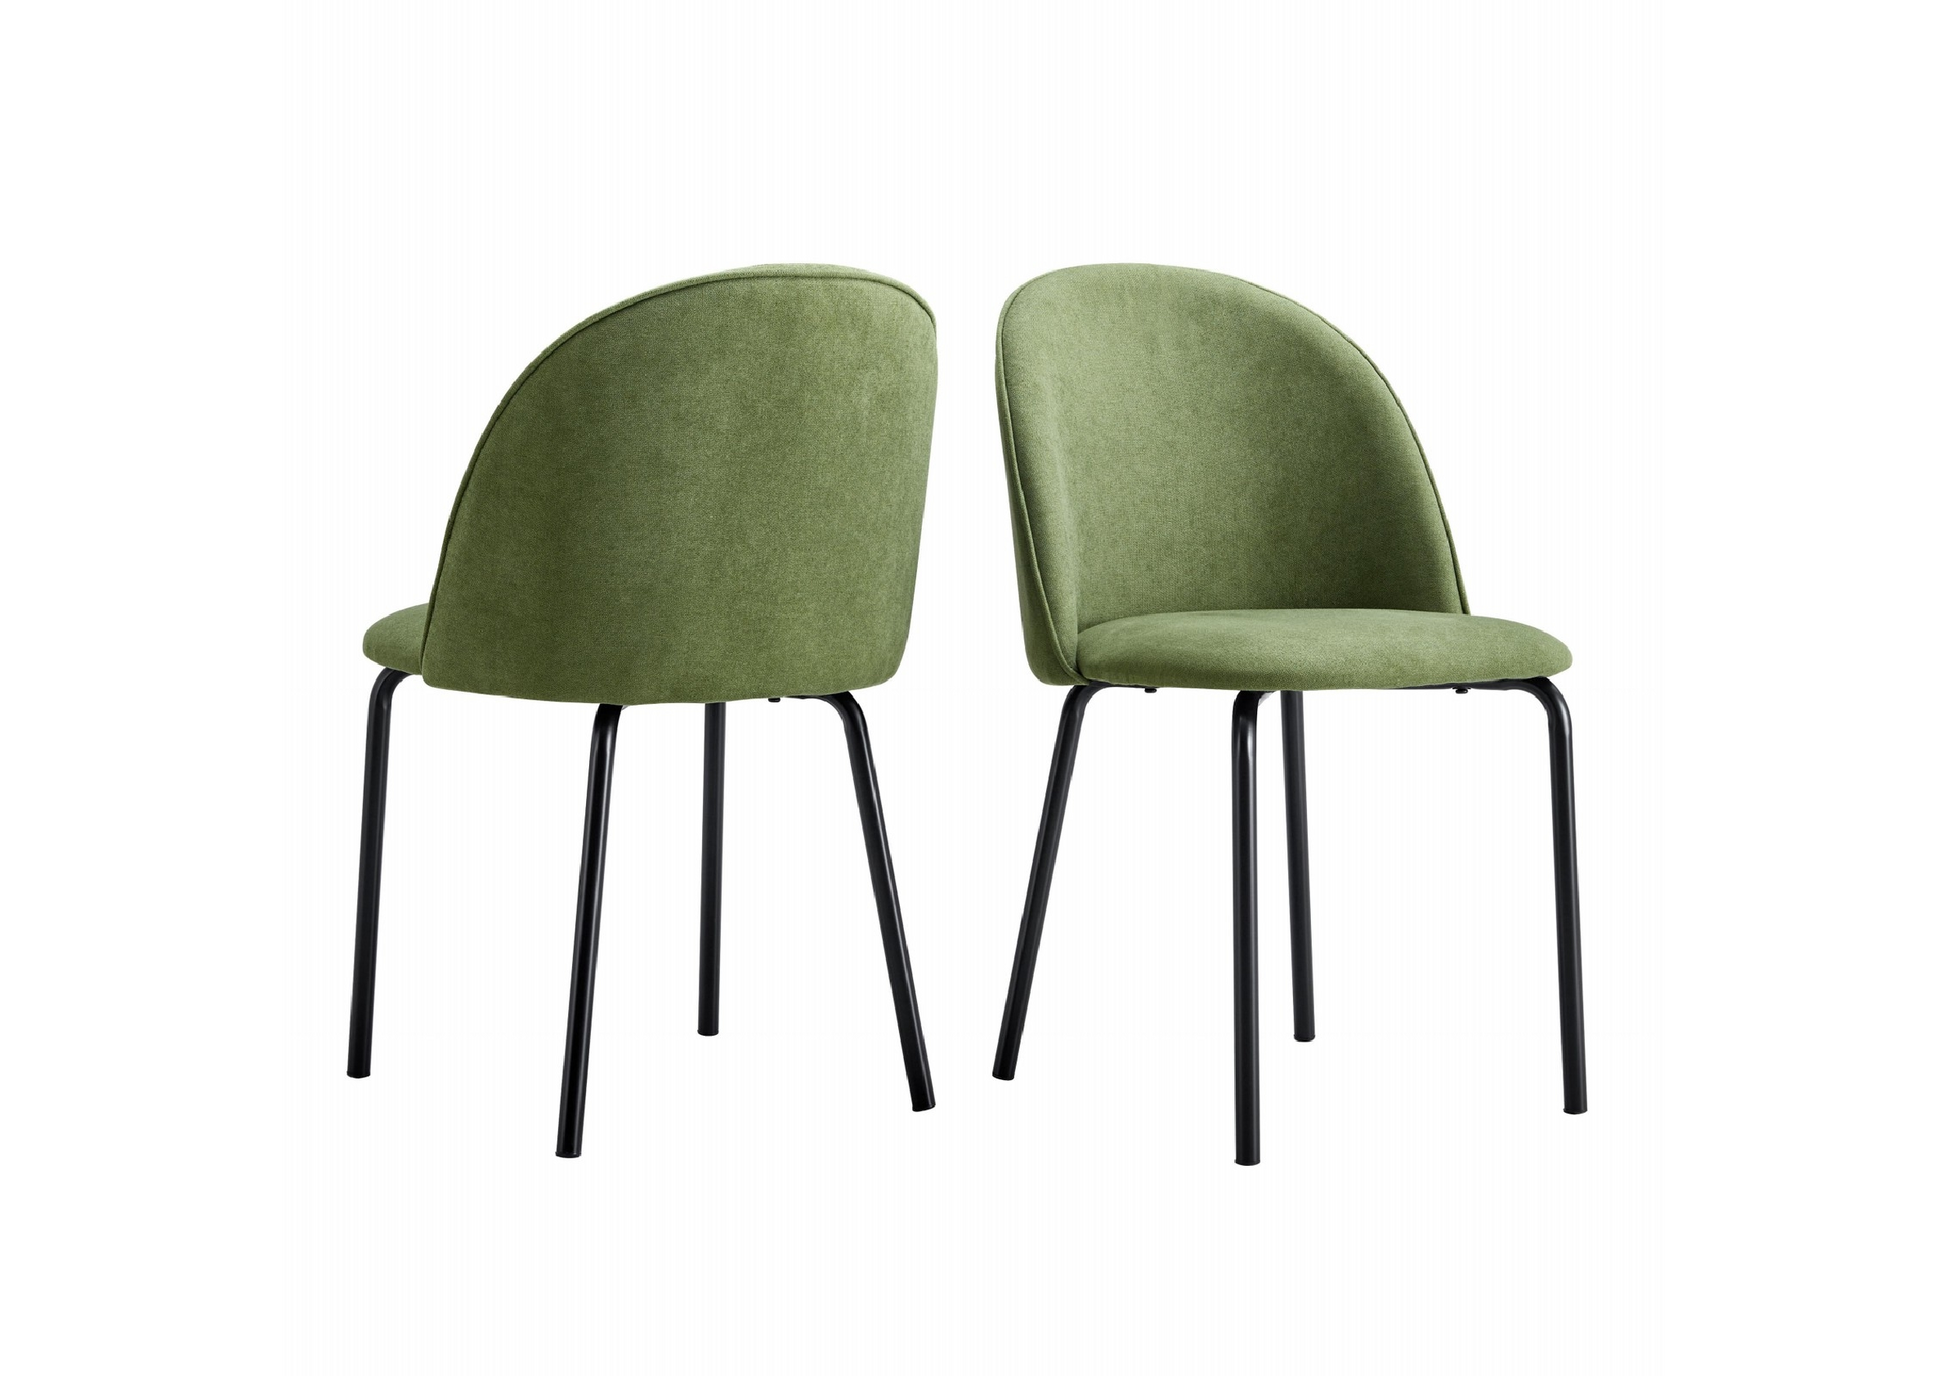 Green Modern Chair Set Of 2 With Iron Tube Legs,